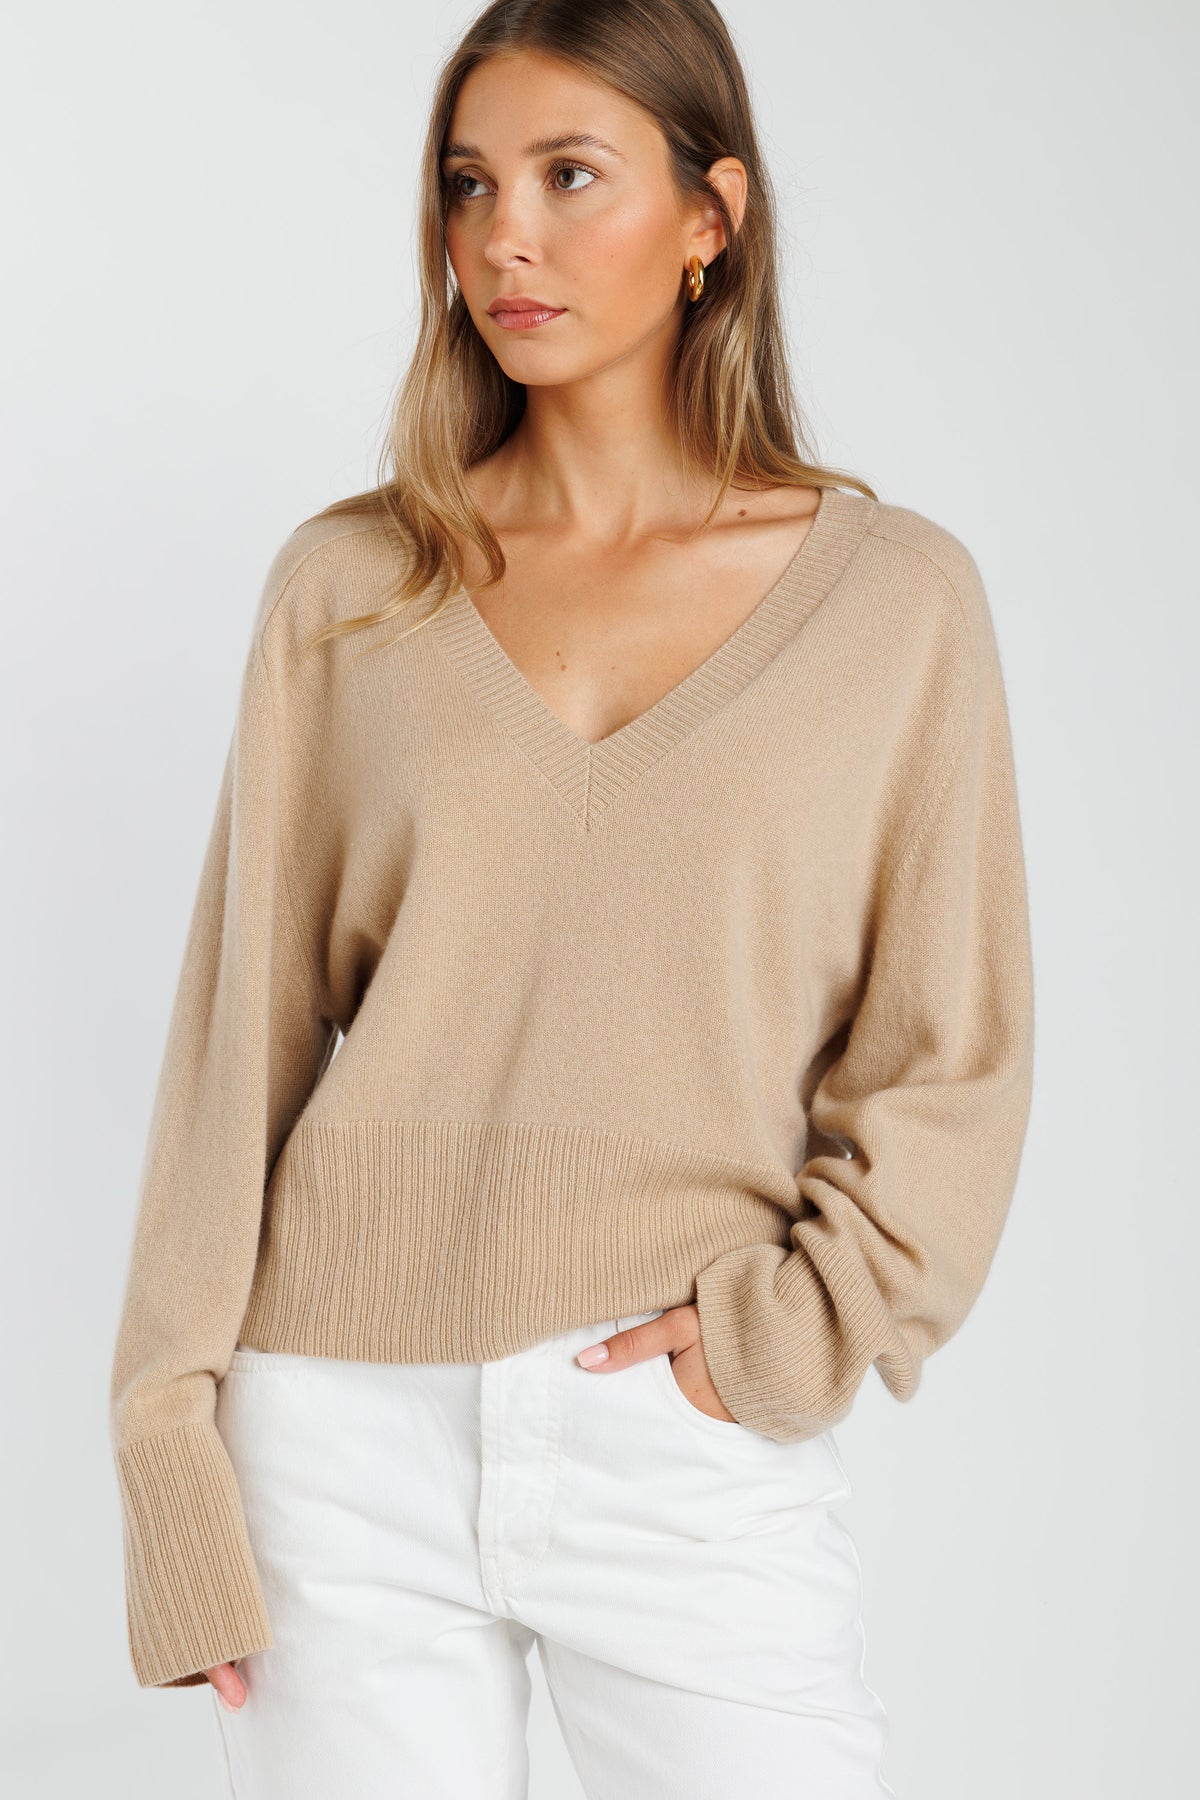 Crush Cashmere Billie V Neck in Soft Camel available at TNT The New Trend Australia. Free shipping on orders over $300 AUD.